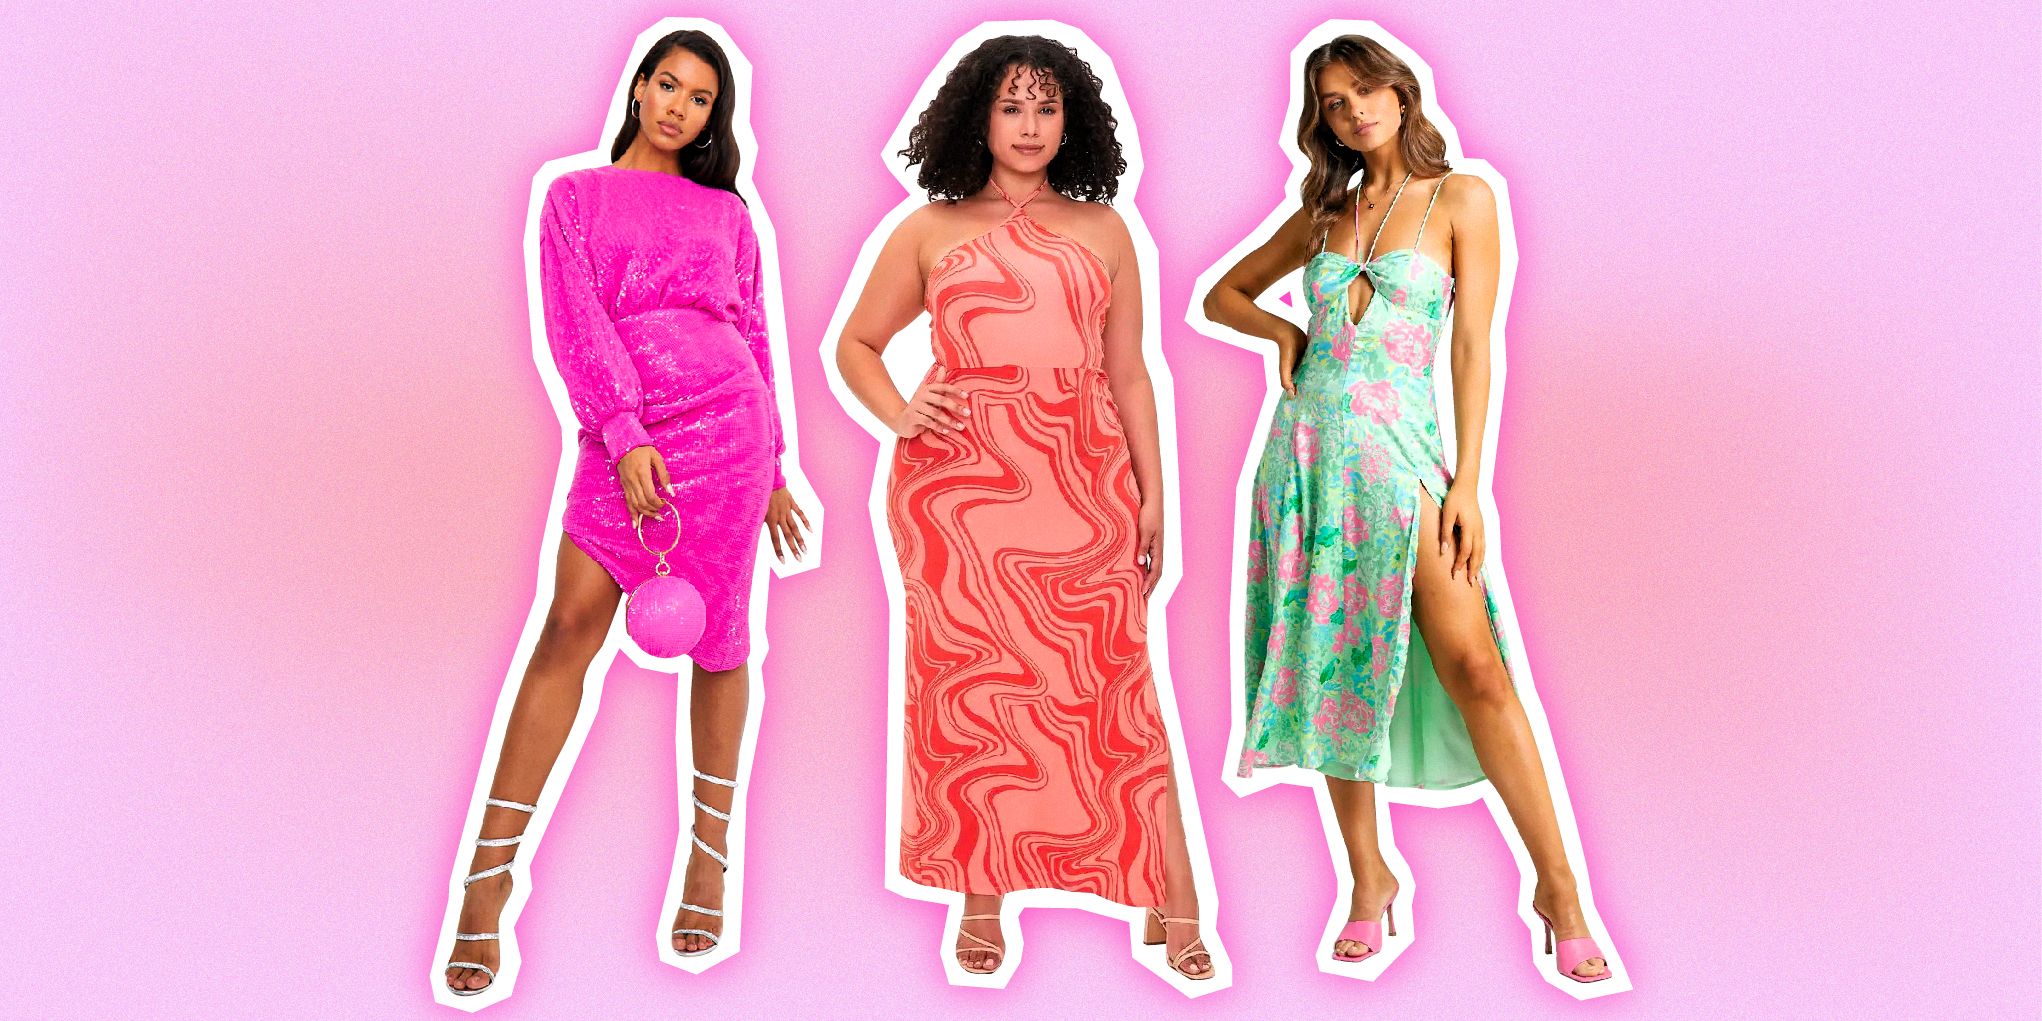 8 Graduation Dresses For College You Should Keep In Mind - Society19